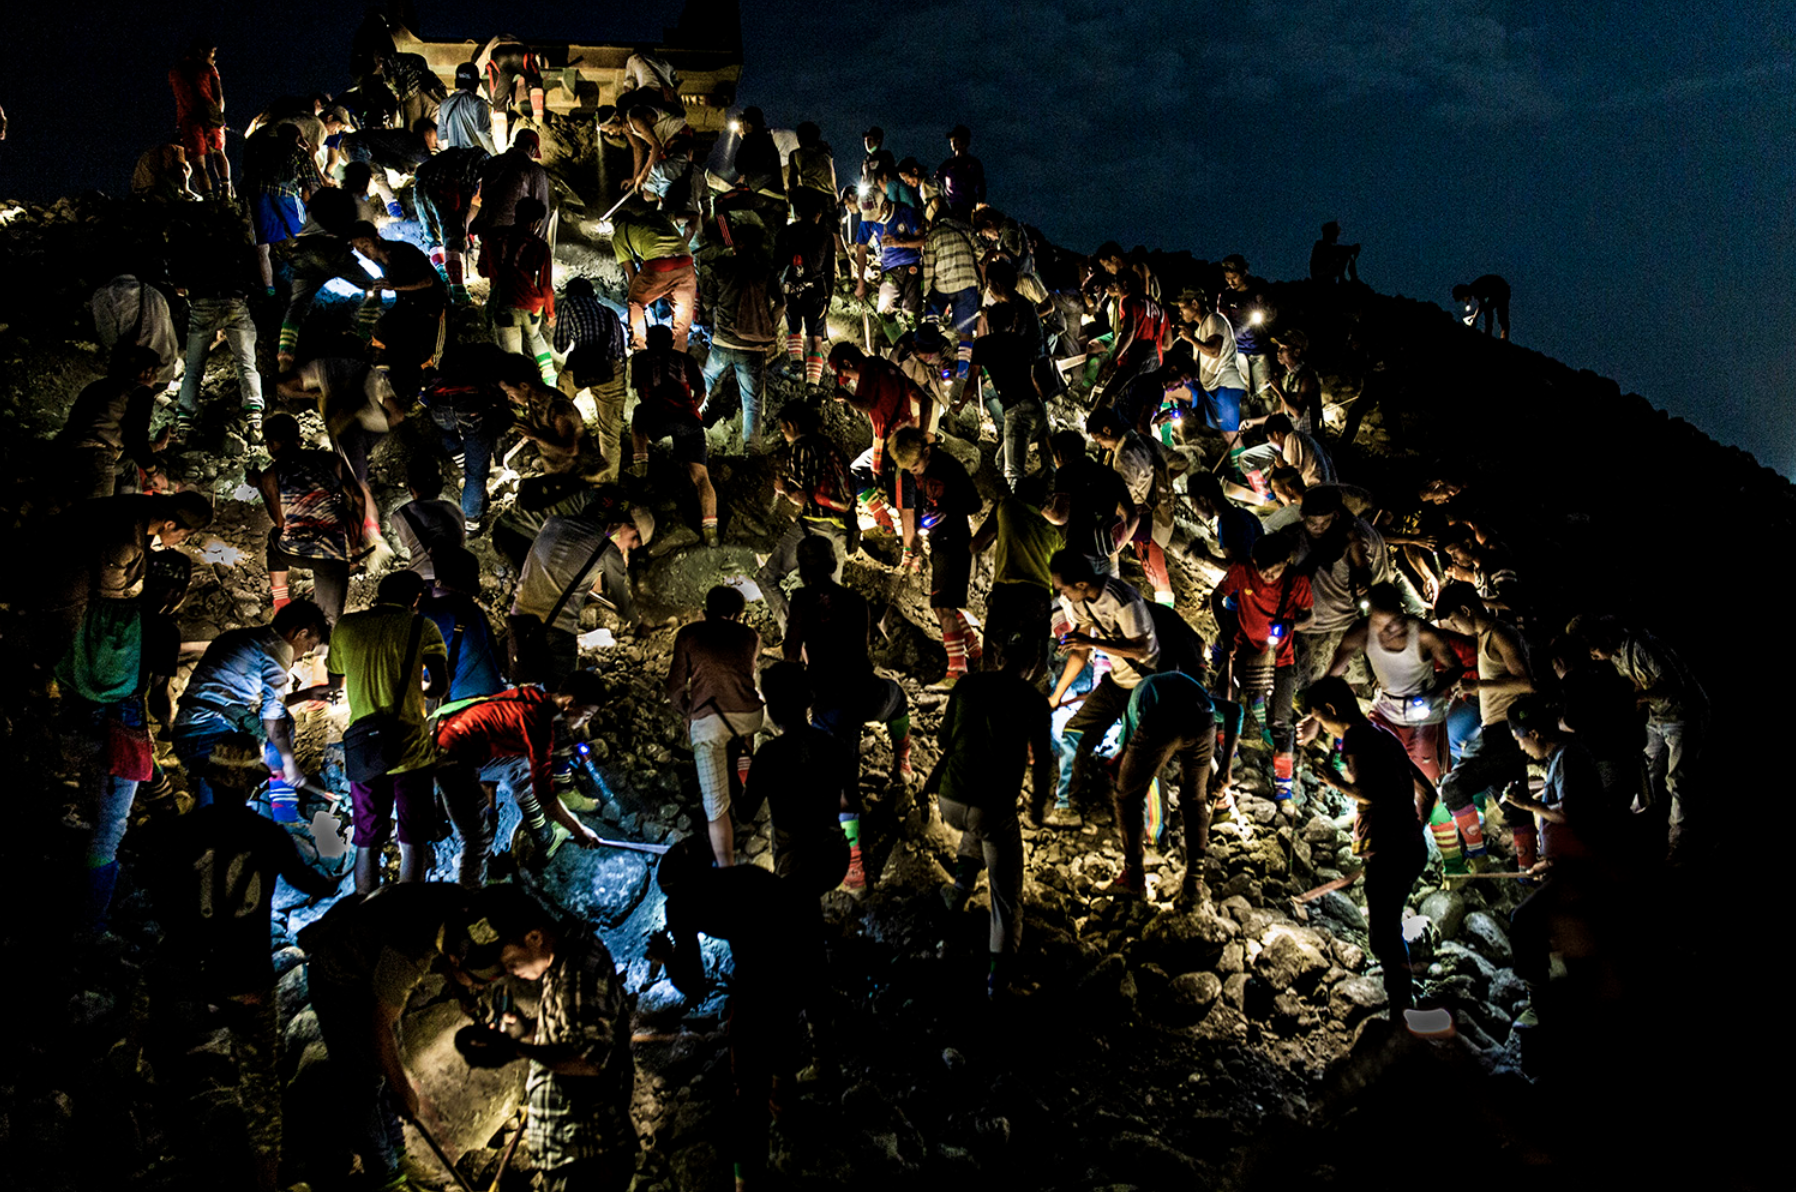 Freelance miners search for jade stones at night with torchlights on a waste site in Hpakant on May 18, 2019. Image by Hkun Lat. Myanmar, 2019. 